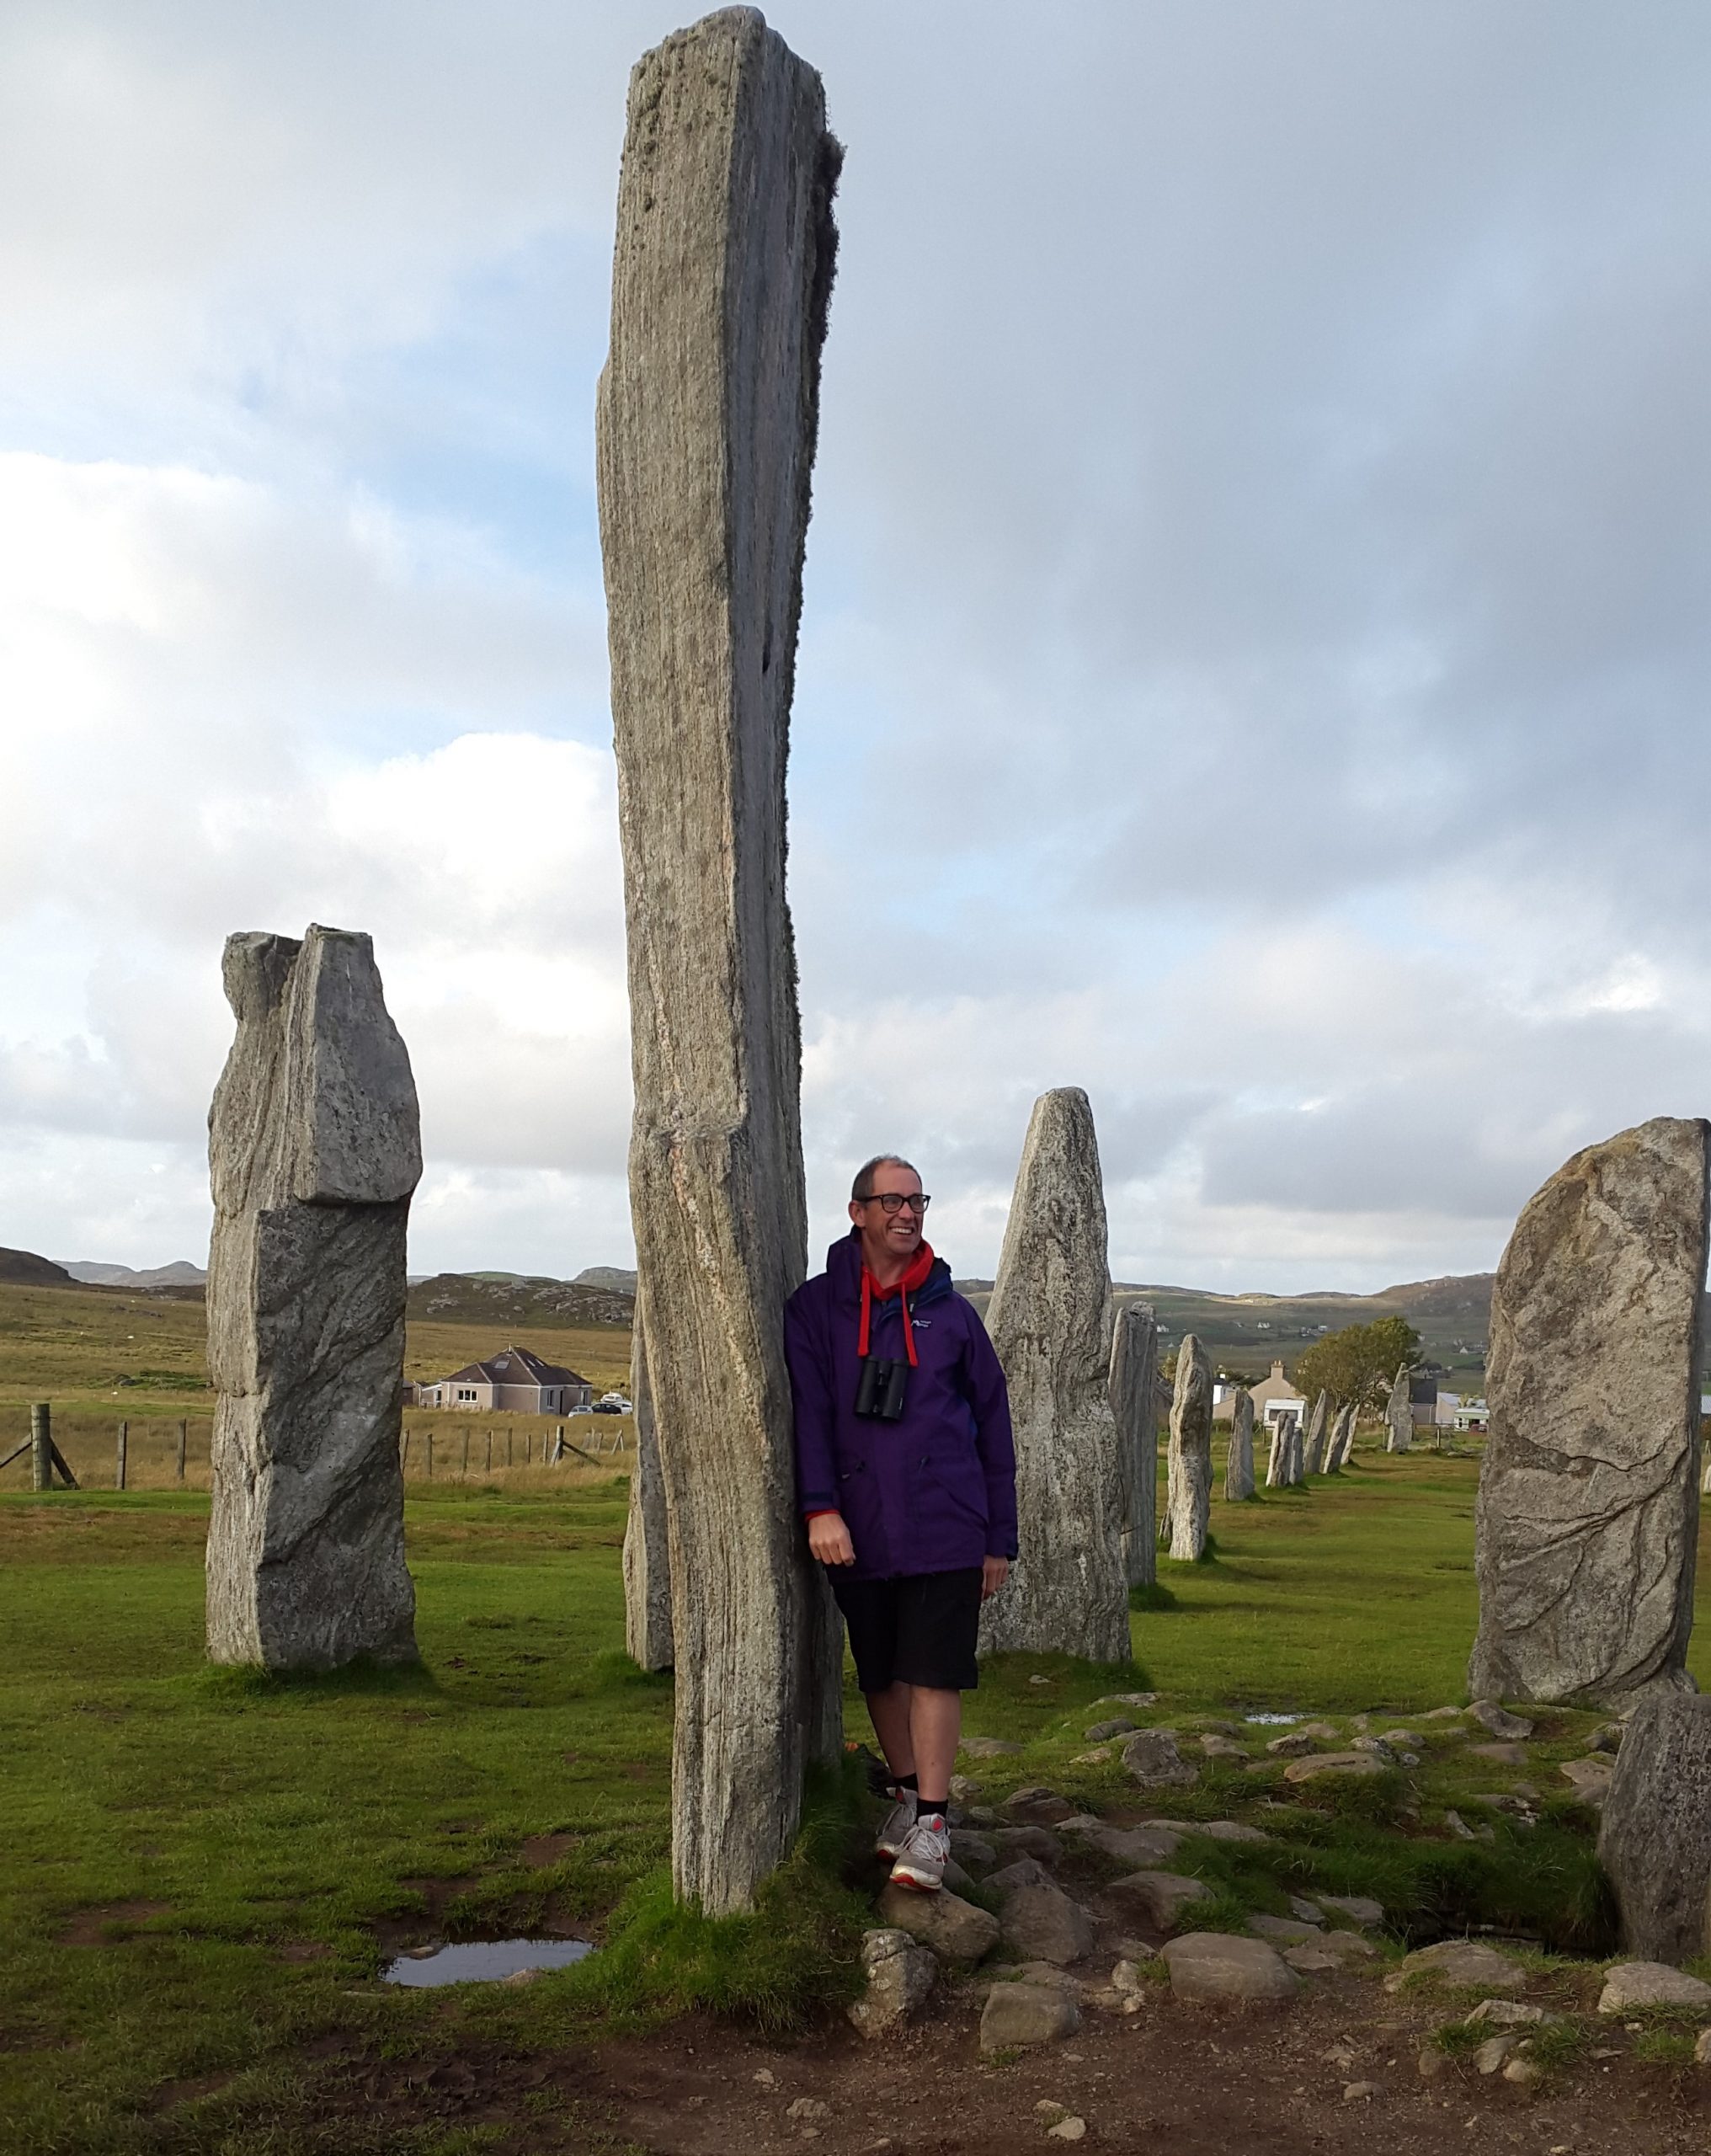 CALLANISH, A MUST FOR EVERYONE WHO VISITS LEWIS